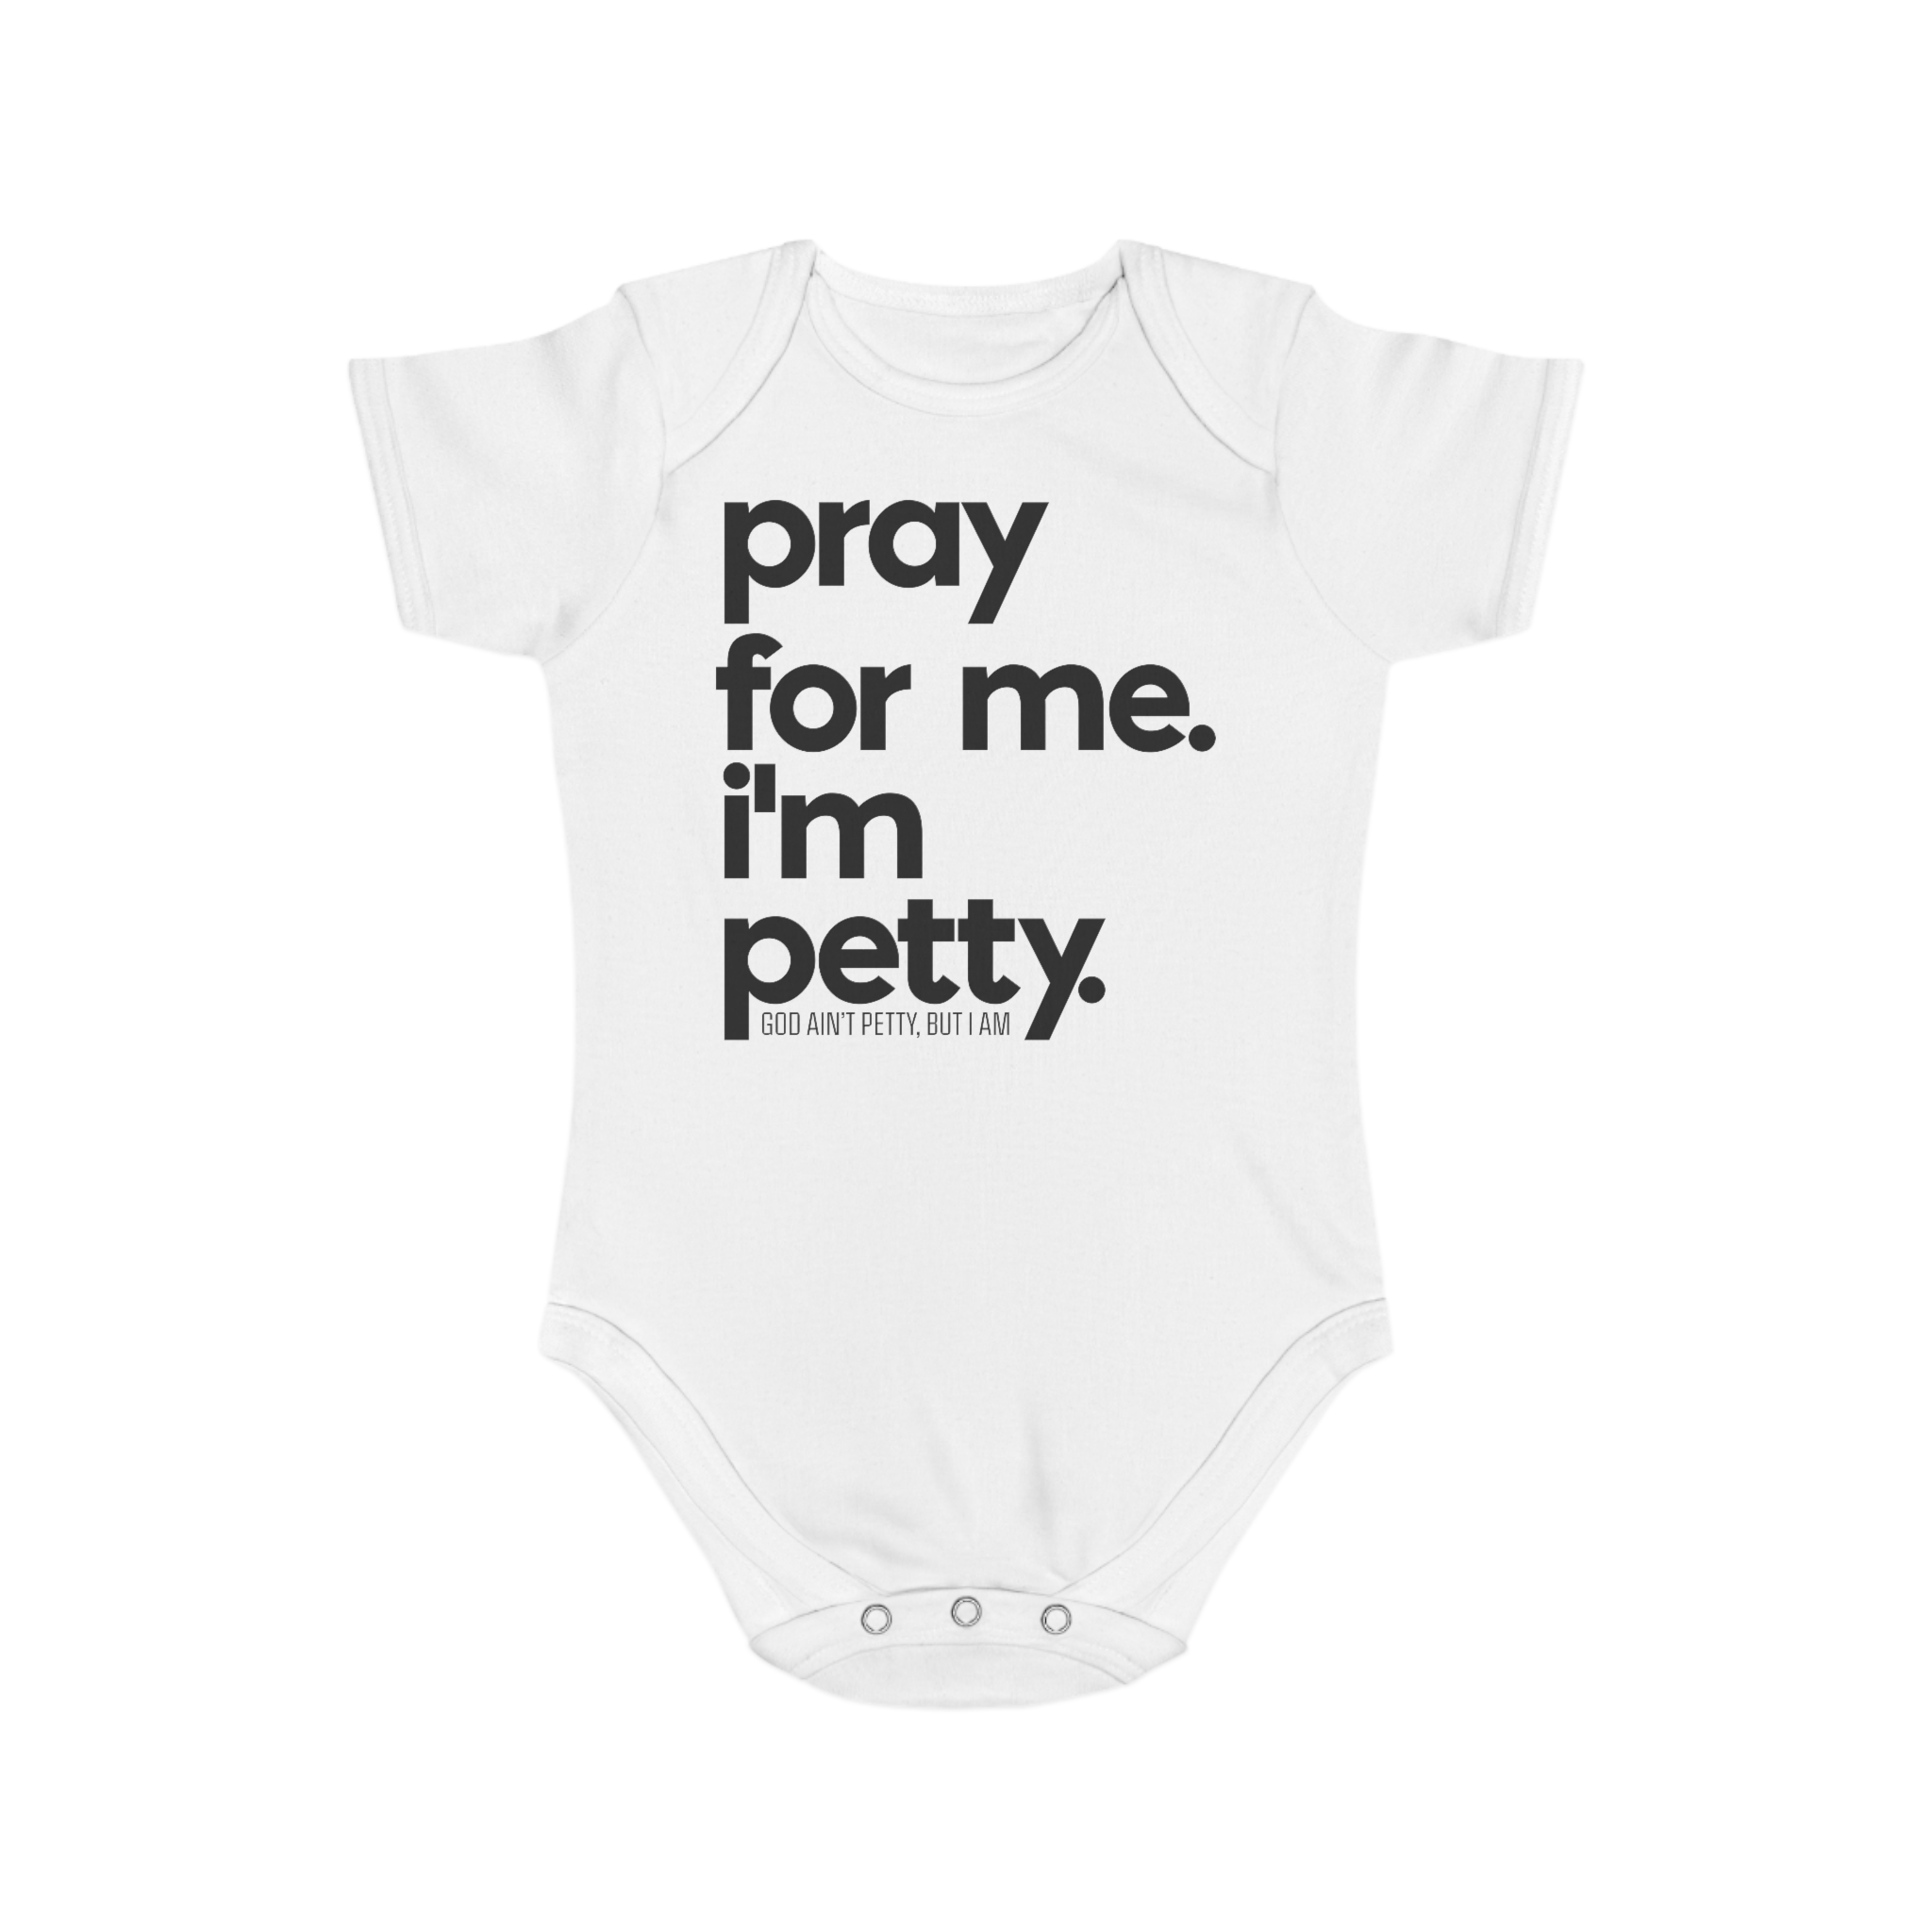 Pray for me. I'm Petty One Piece Newborn Baby Tee-Kids clothes-The Original God Ain't Petty But I Am